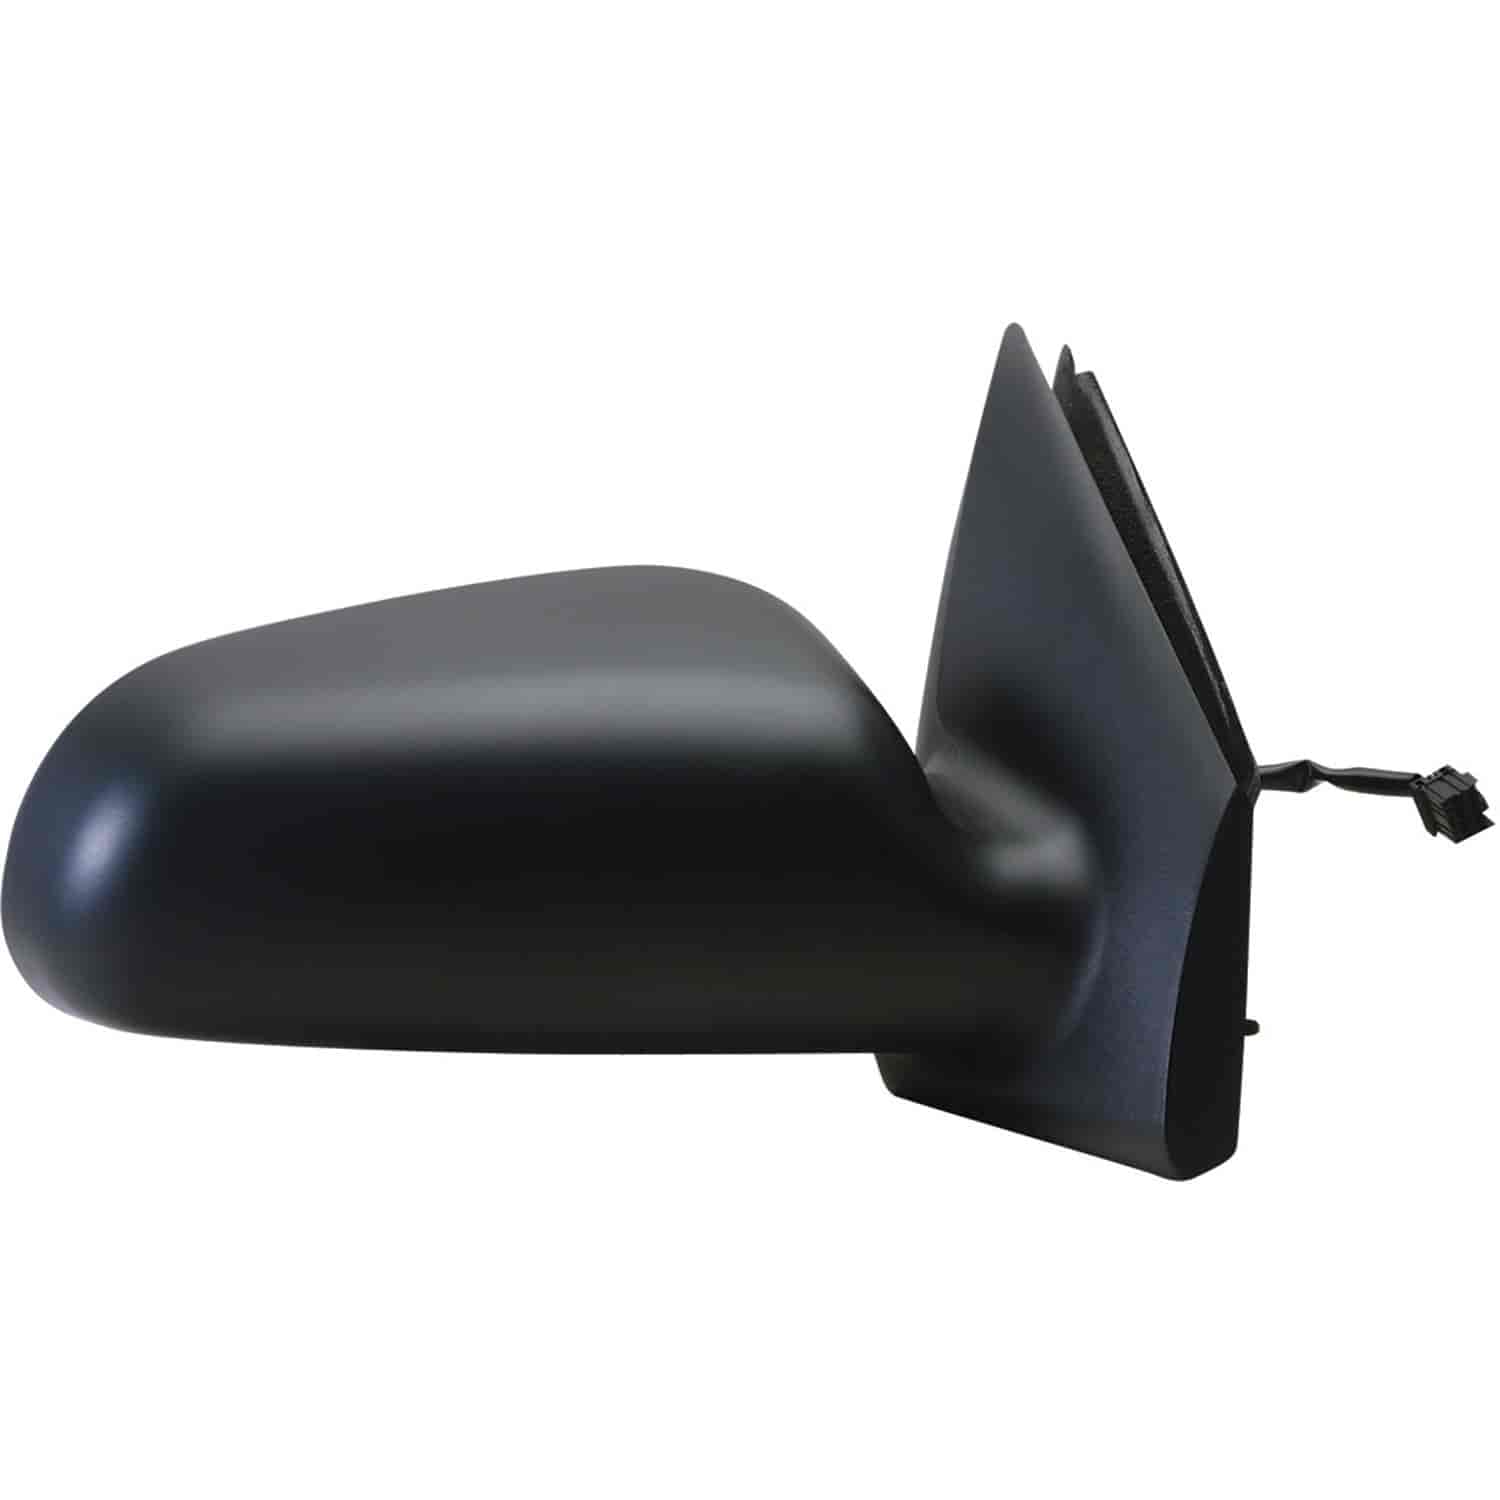 OEM Style Replacement mirror for 04-07 Dodge Durango passenger side mirror tested to fit and functio